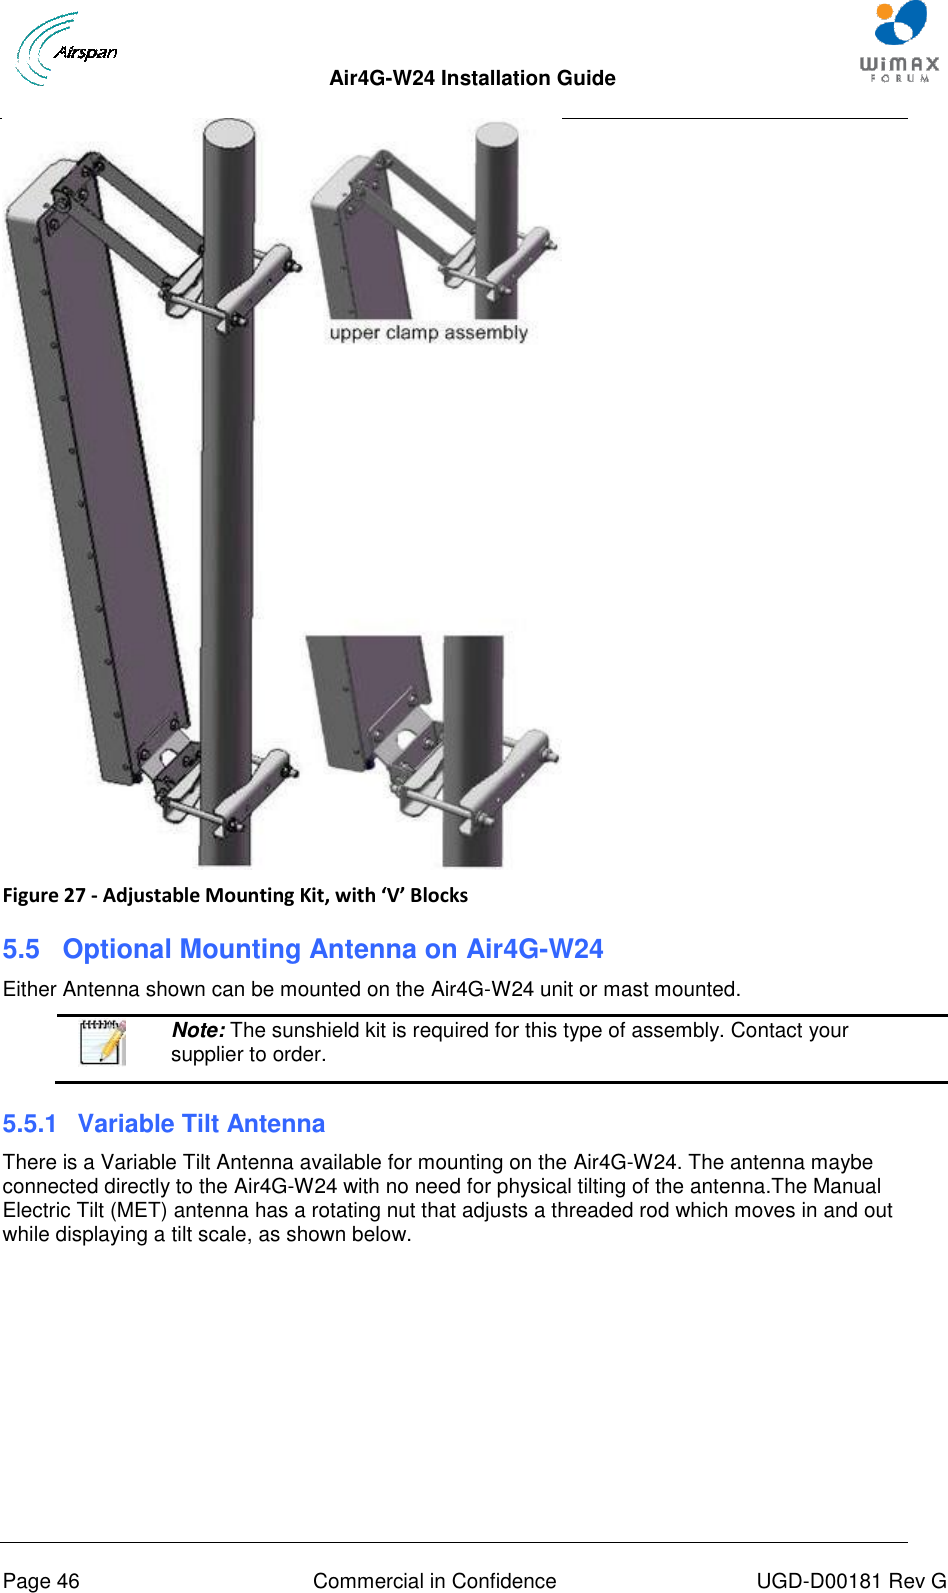  Air4G-W24 Installation Guide       Page 46  Commercial in Confidence  UGD-D00181 Rev G  Figure 27 - Adjustable Mounting Kit, with ‘V’ Blocks 5.5  Optional Mounting Antenna on Air4G-W24 Either Antenna shown can be mounted on the Air4G-W24 unit or mast mounted.   Note: The sunshield kit is required for this type of assembly. Contact your supplier to order. 5.5.1  Variable Tilt Antenna There is a Variable Tilt Antenna available for mounting on the Air4G-W24. The antenna maybe connected directly to the Air4G-W24 with no need for physical tilting of the antenna.The Manual Electric Tilt (MET) antenna has a rotating nut that adjusts a threaded rod which moves in and out while displaying a tilt scale, as shown below. 